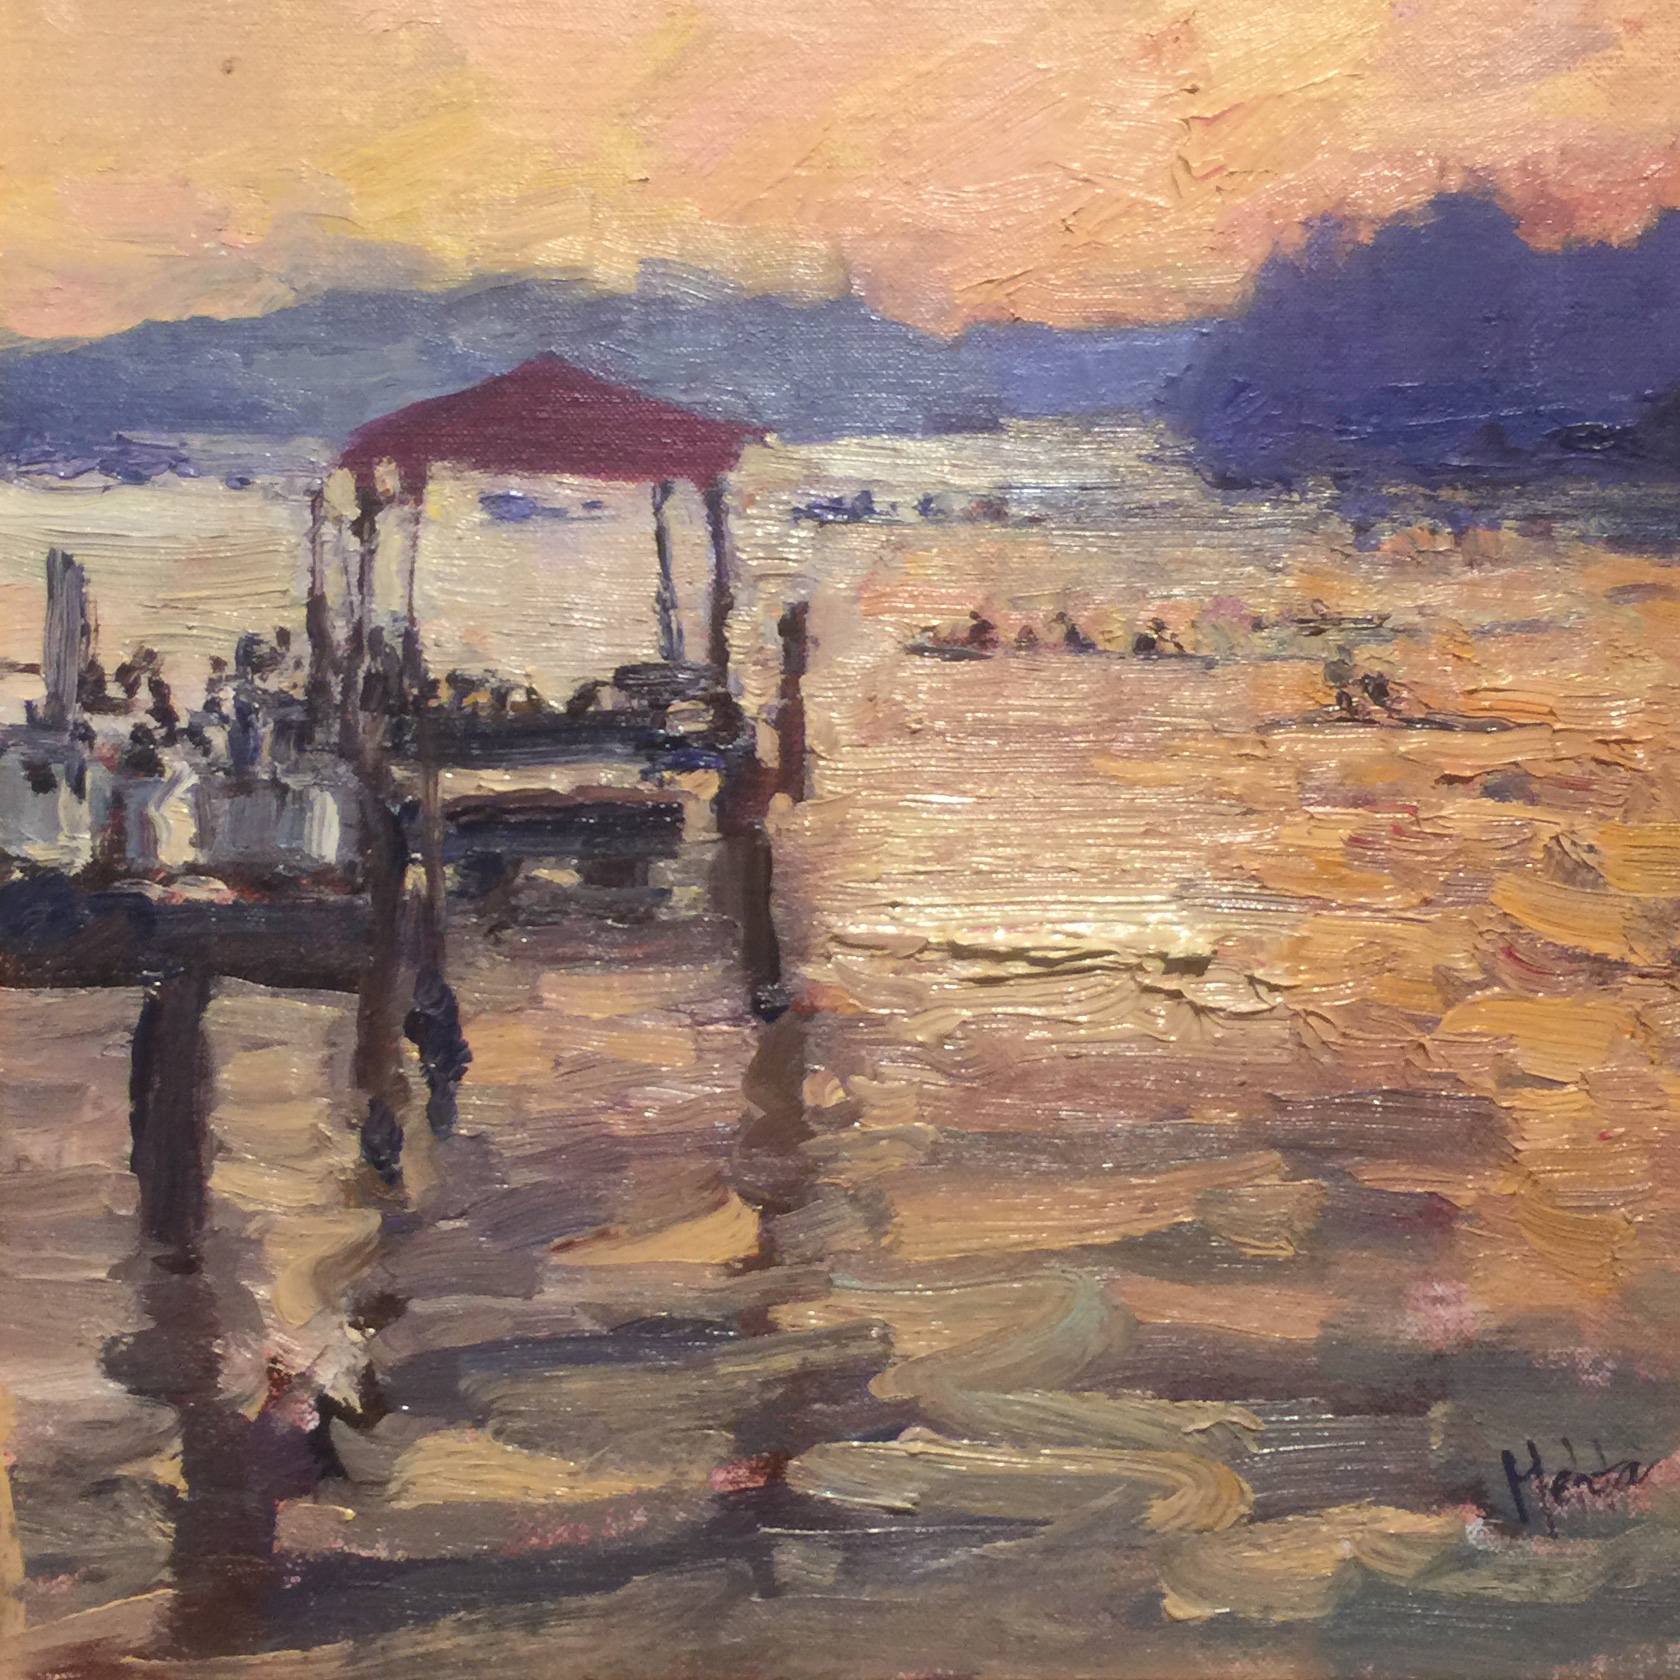 I painted this during Paint Annapolis 2015 and received Best Painting Incorporating Water award.